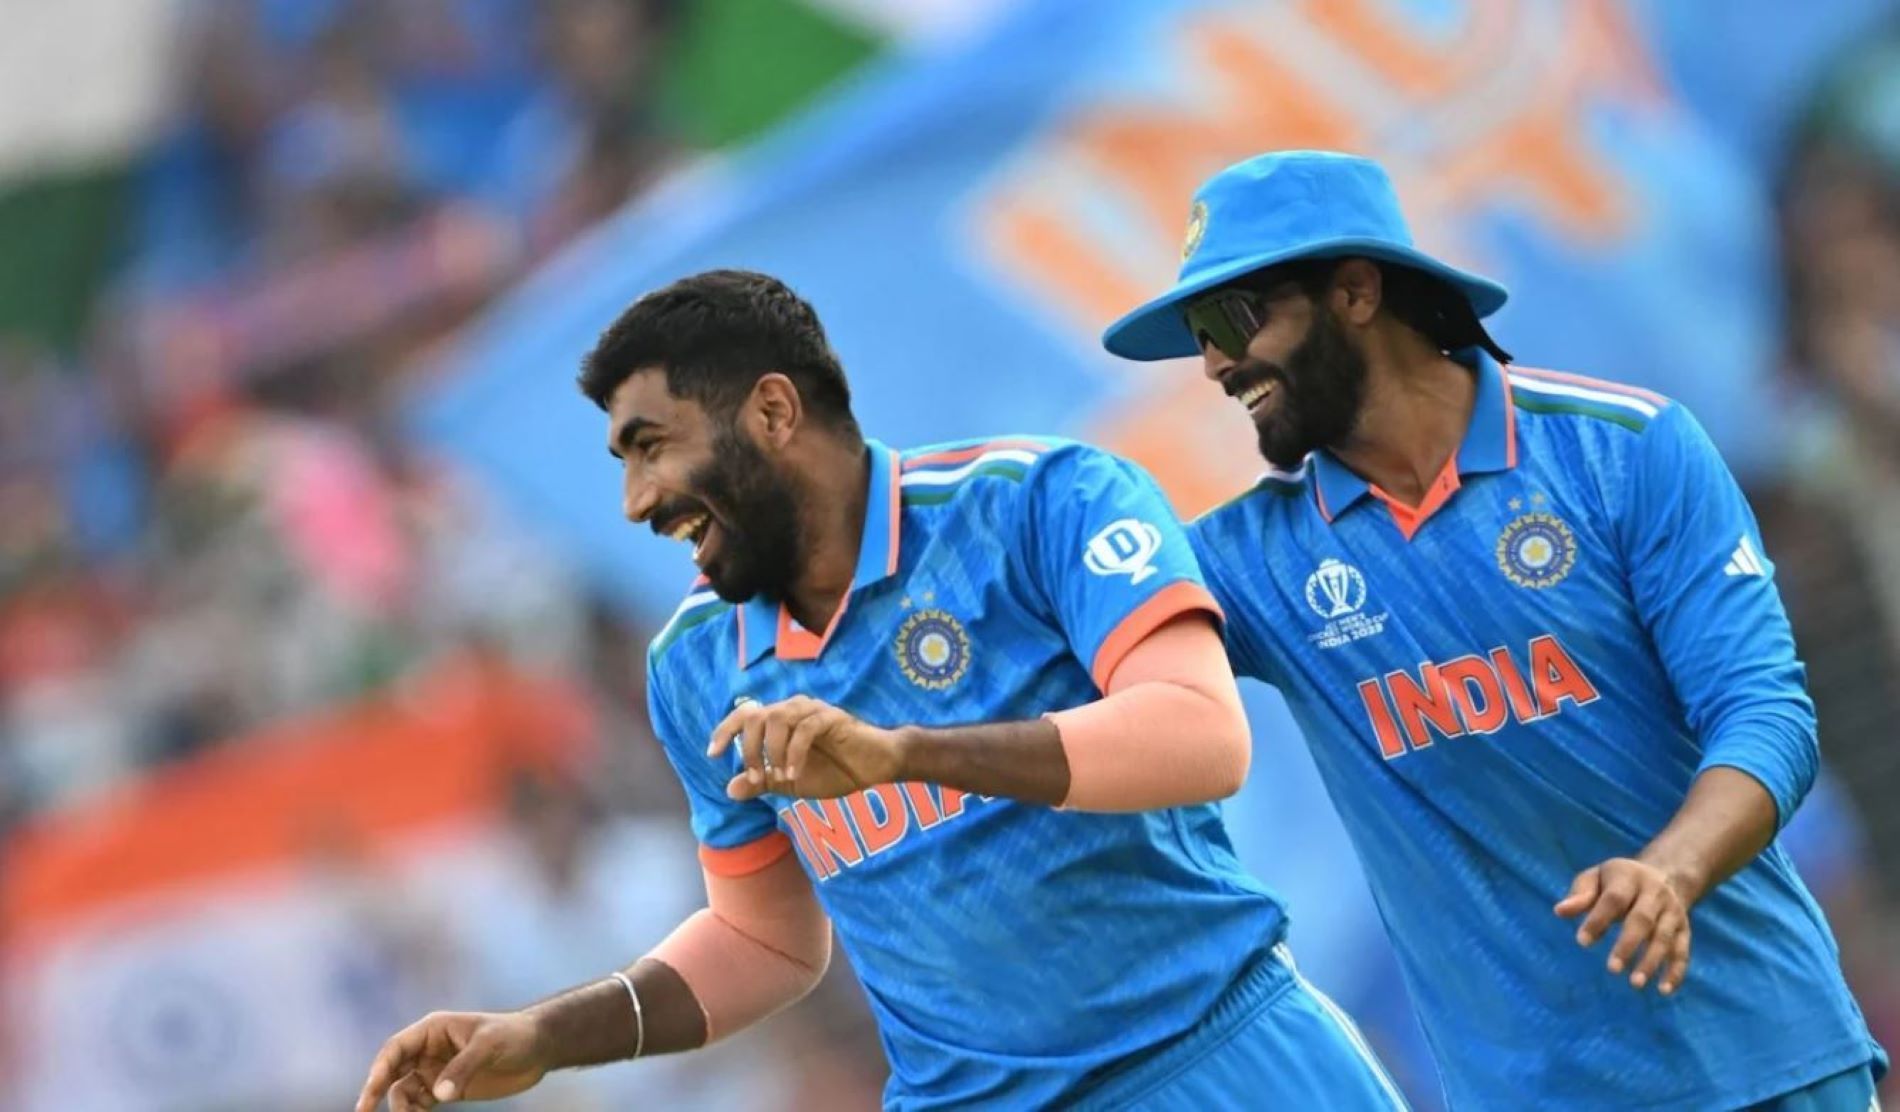 Bumrah picked up two vital wickets in his second spell against Pakistan.